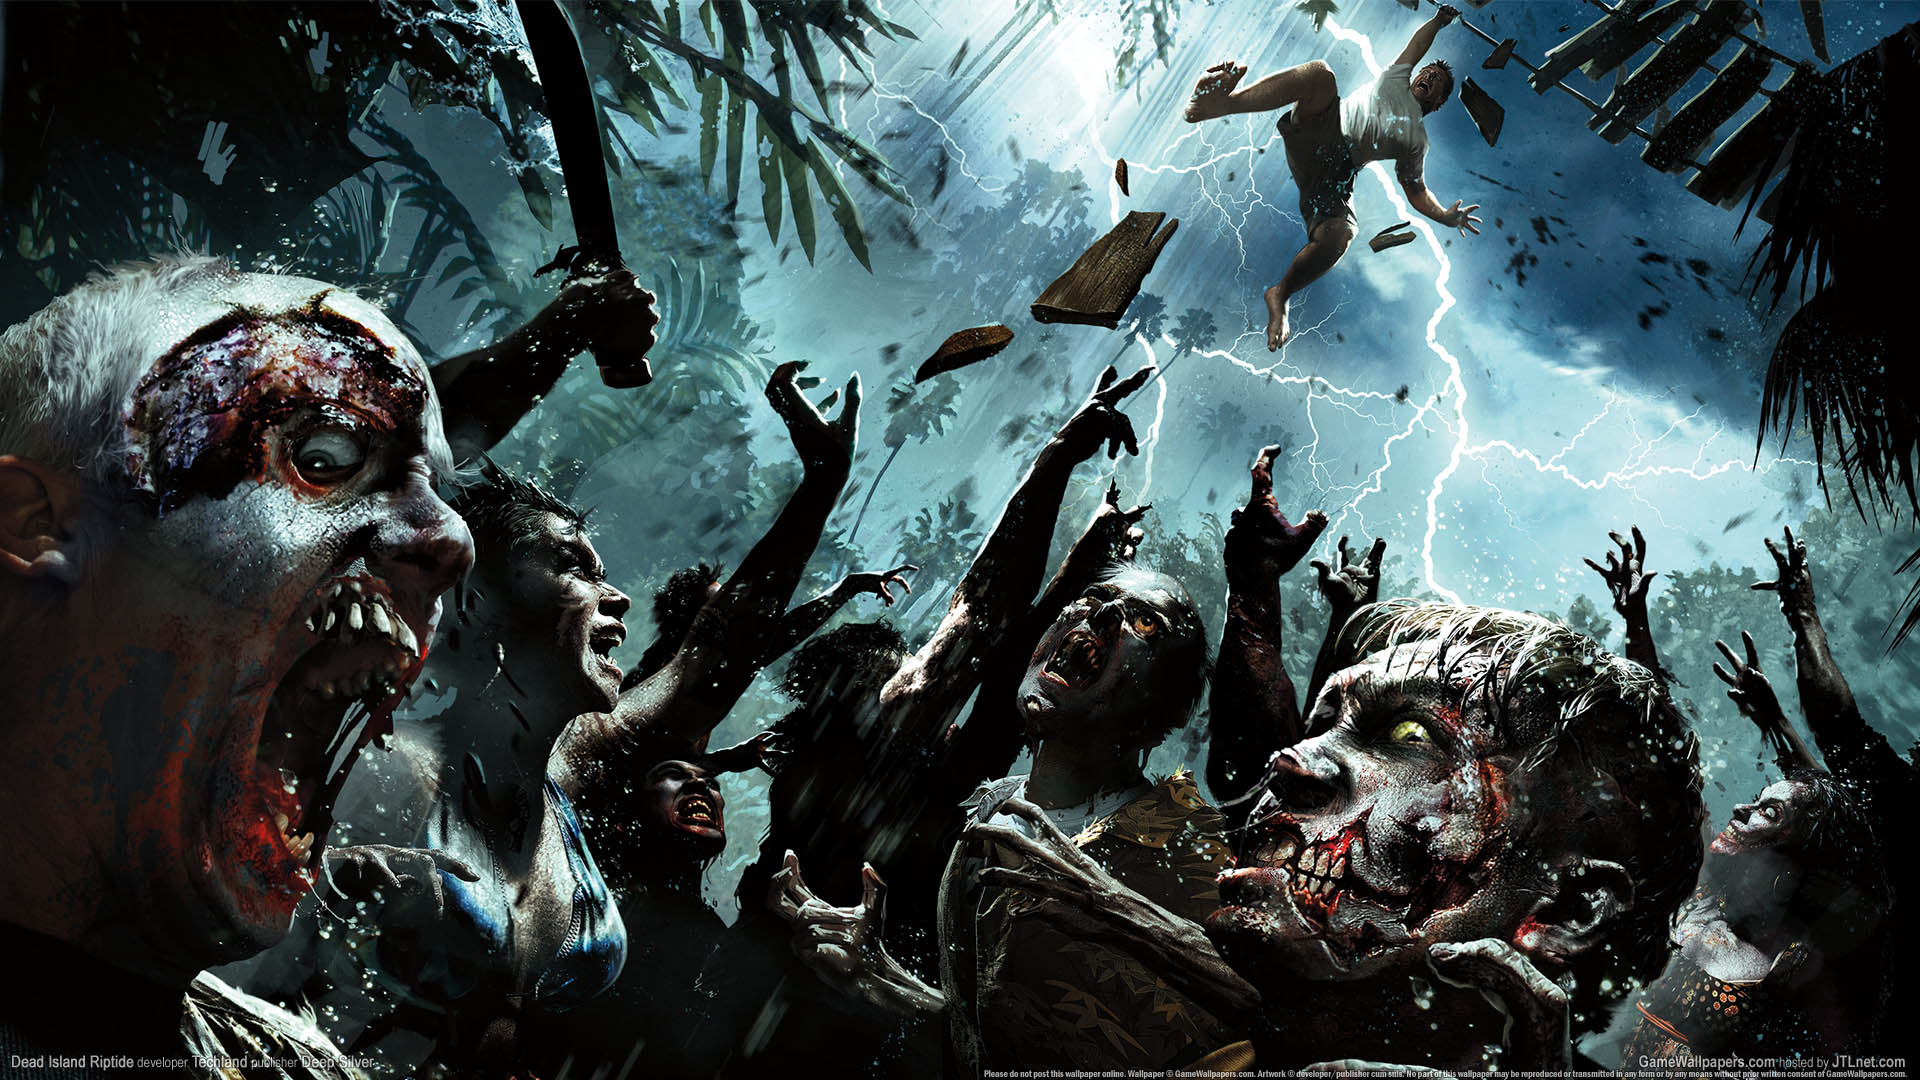 Dead Island Riptide achtergrond 02 1920x1080